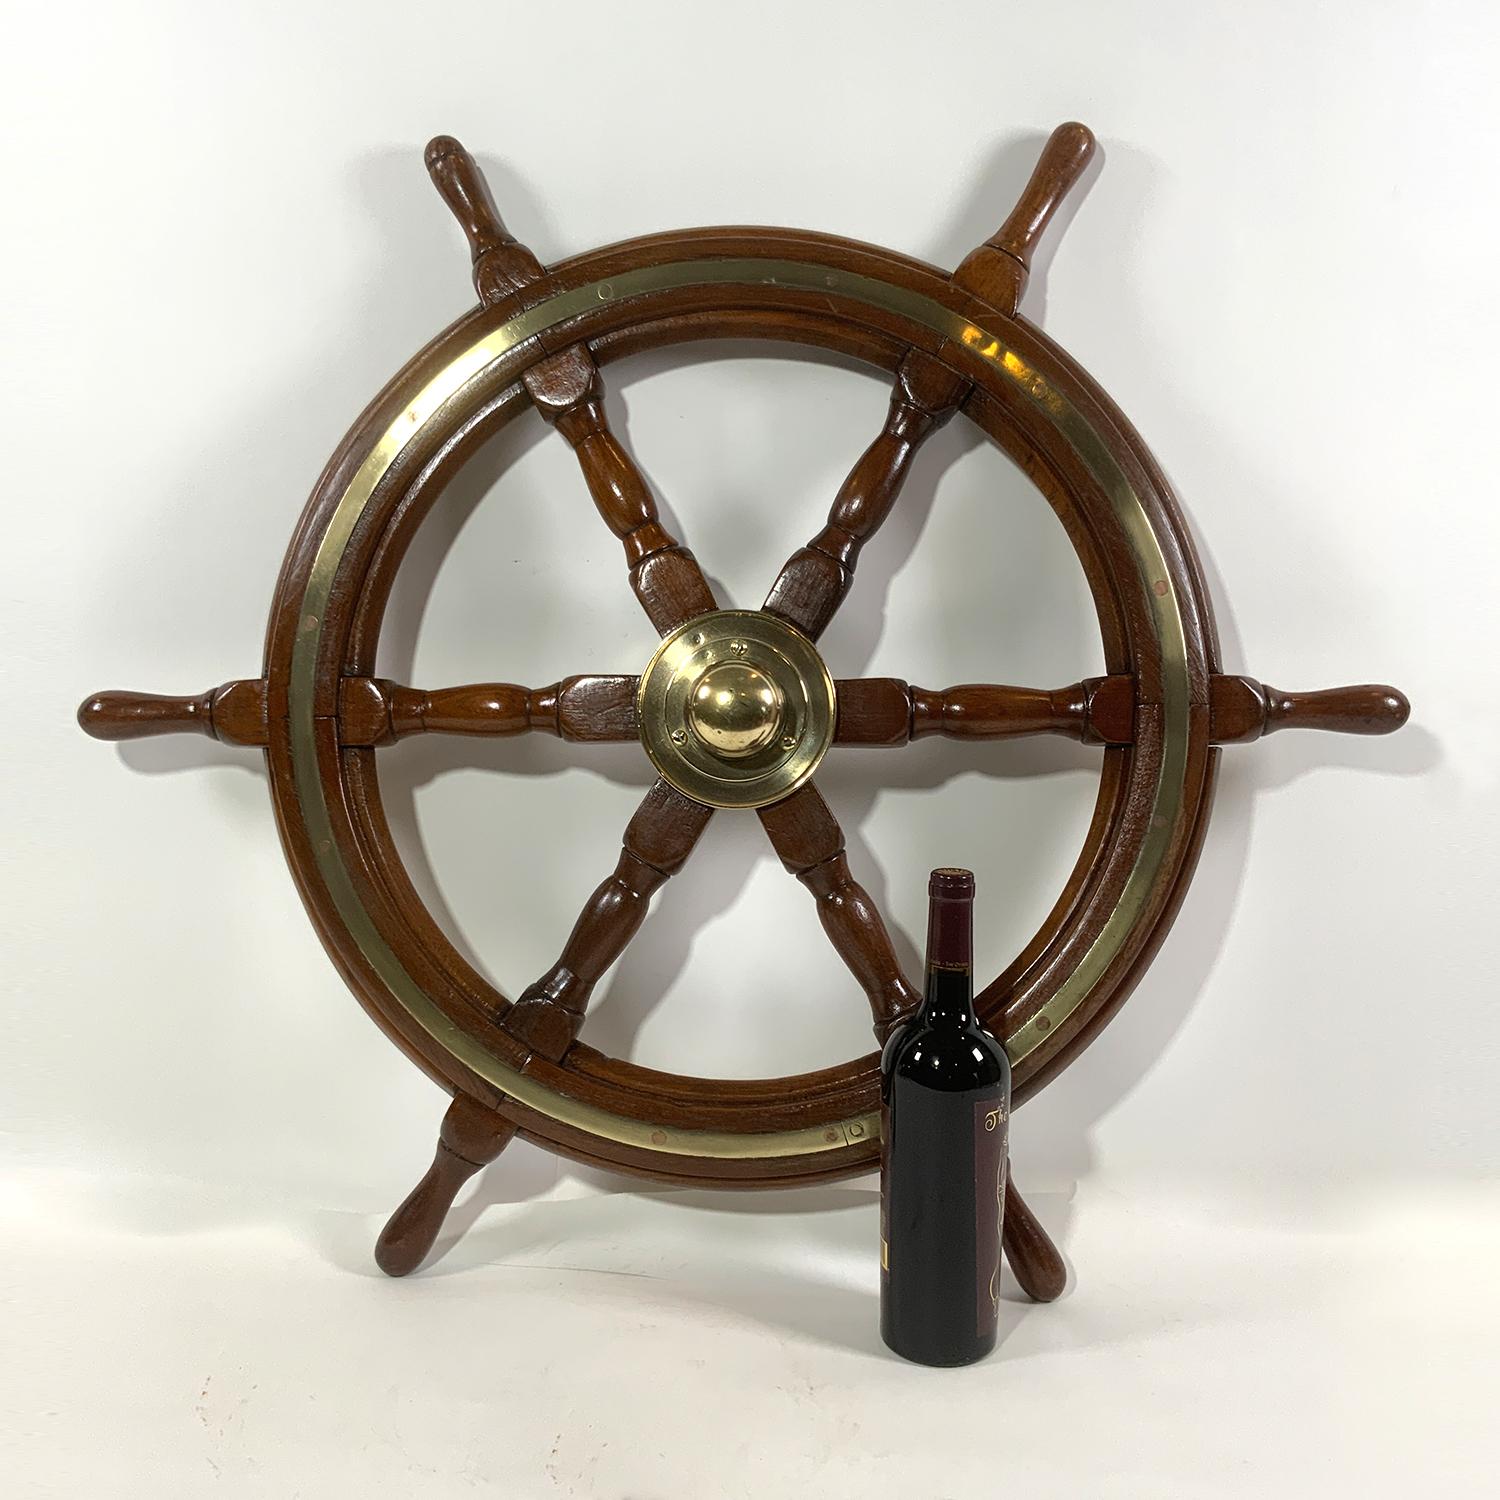 Varnish wood ships wheel with substantial brass hub and brass trim ring around hub and brass trim around the circumference. Varnish finish on wood.